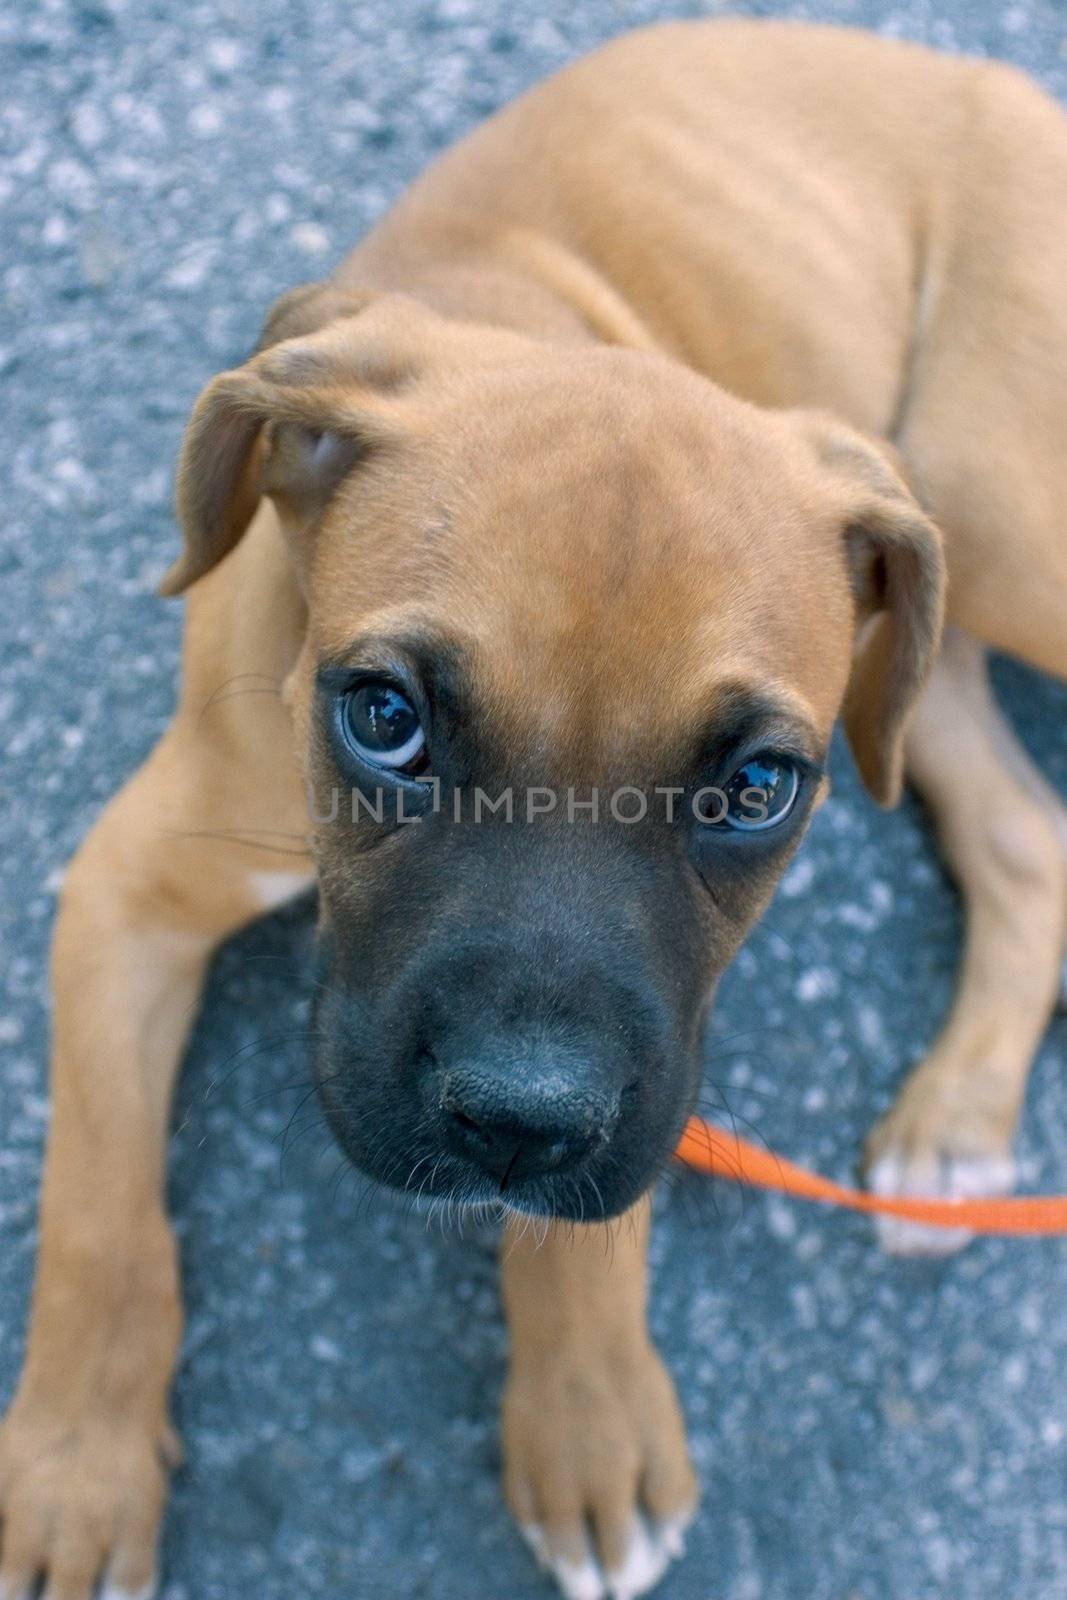 Emile, the baby boxer, show's his pity face while resting on asphalt